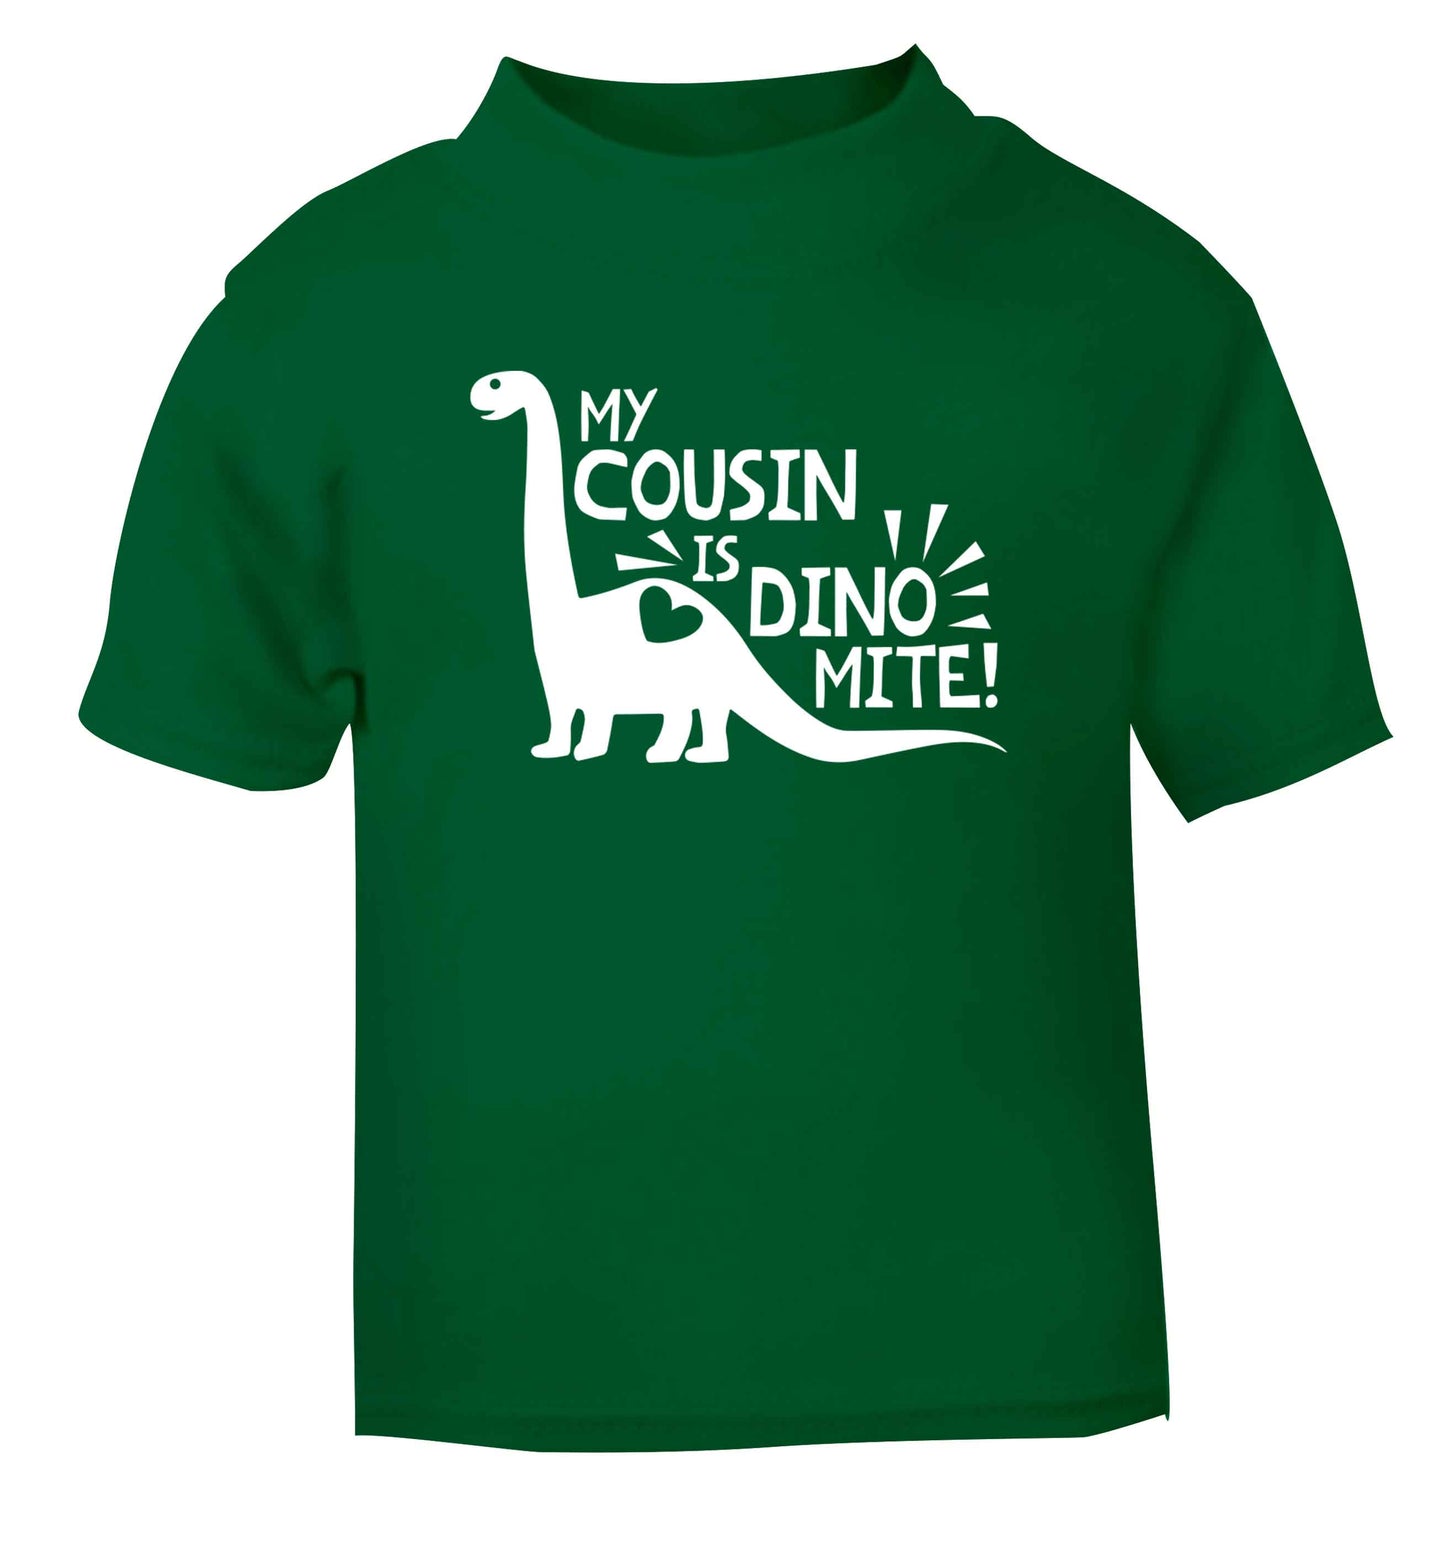 My cousin is dinomite! green Baby Toddler Tshirt 2 Years